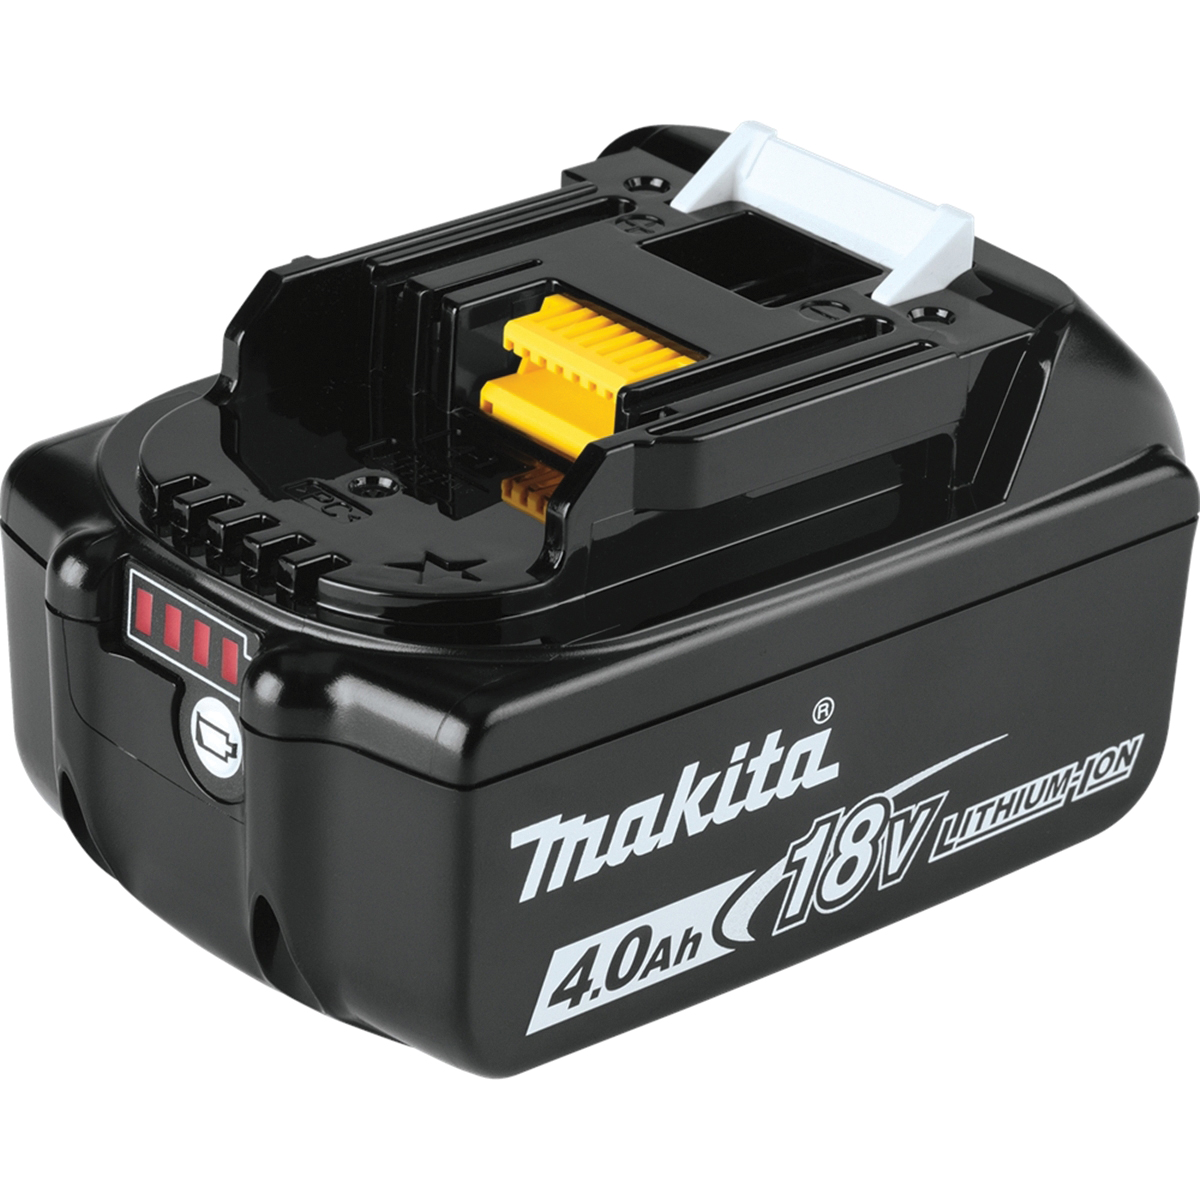 Makita LXT XFD13SM1 Cordless Driver and Drill, Battery Included, 18 V, 4 Ah, 1/2 in Chuck - 3